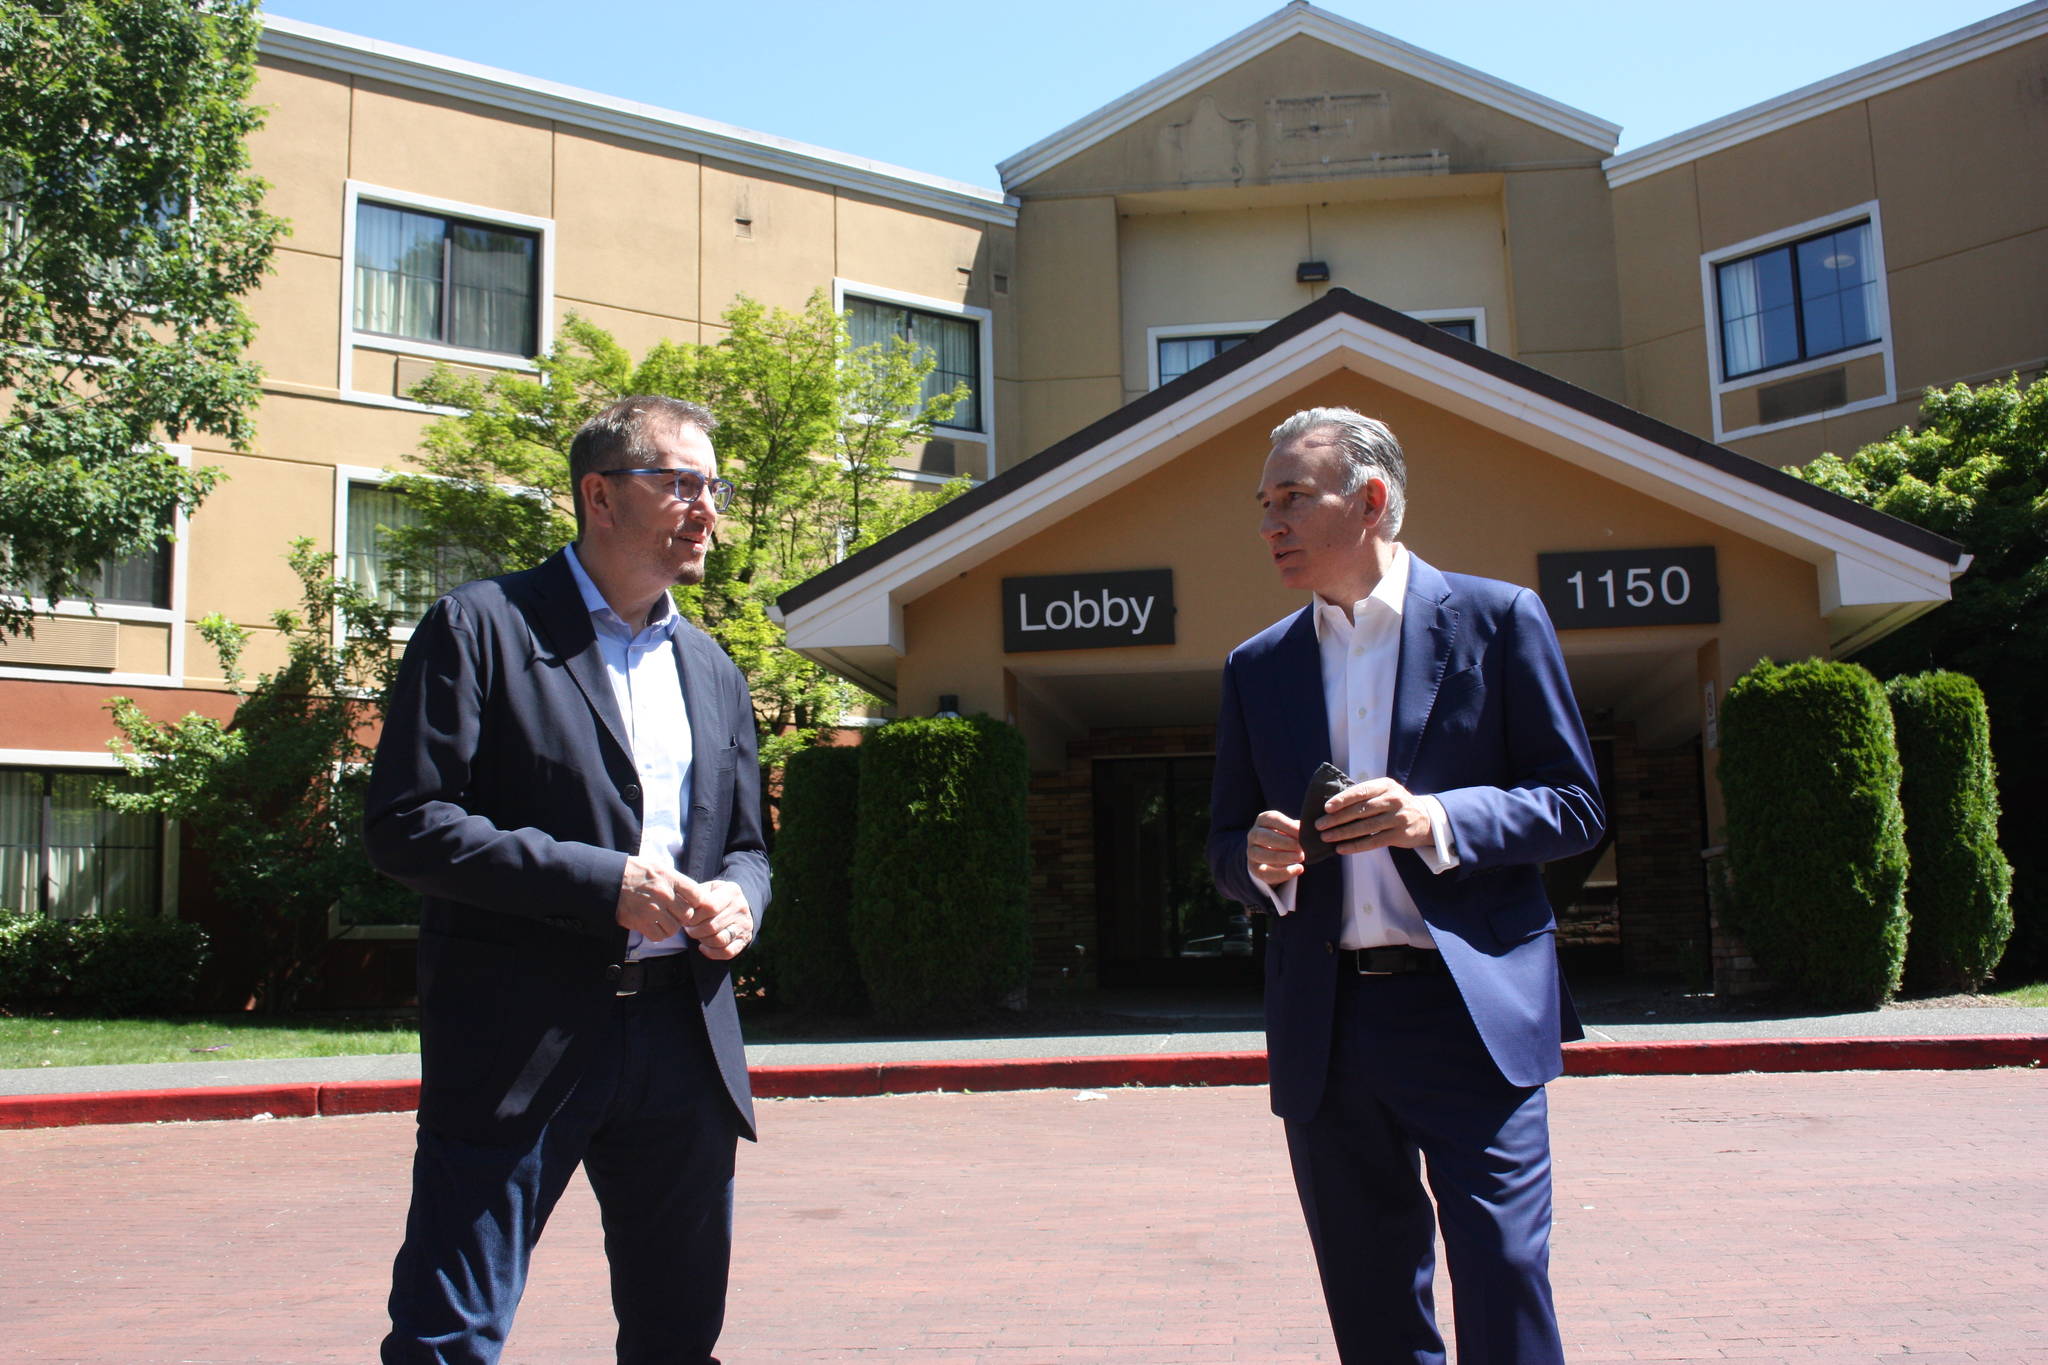 Renton Mayor Armondo Pavone (left) and King County Executive Dow Constantine (right) discuss in front of the newly purchased shelter (Photo by Cameron Sheppard/Sound Publishing)